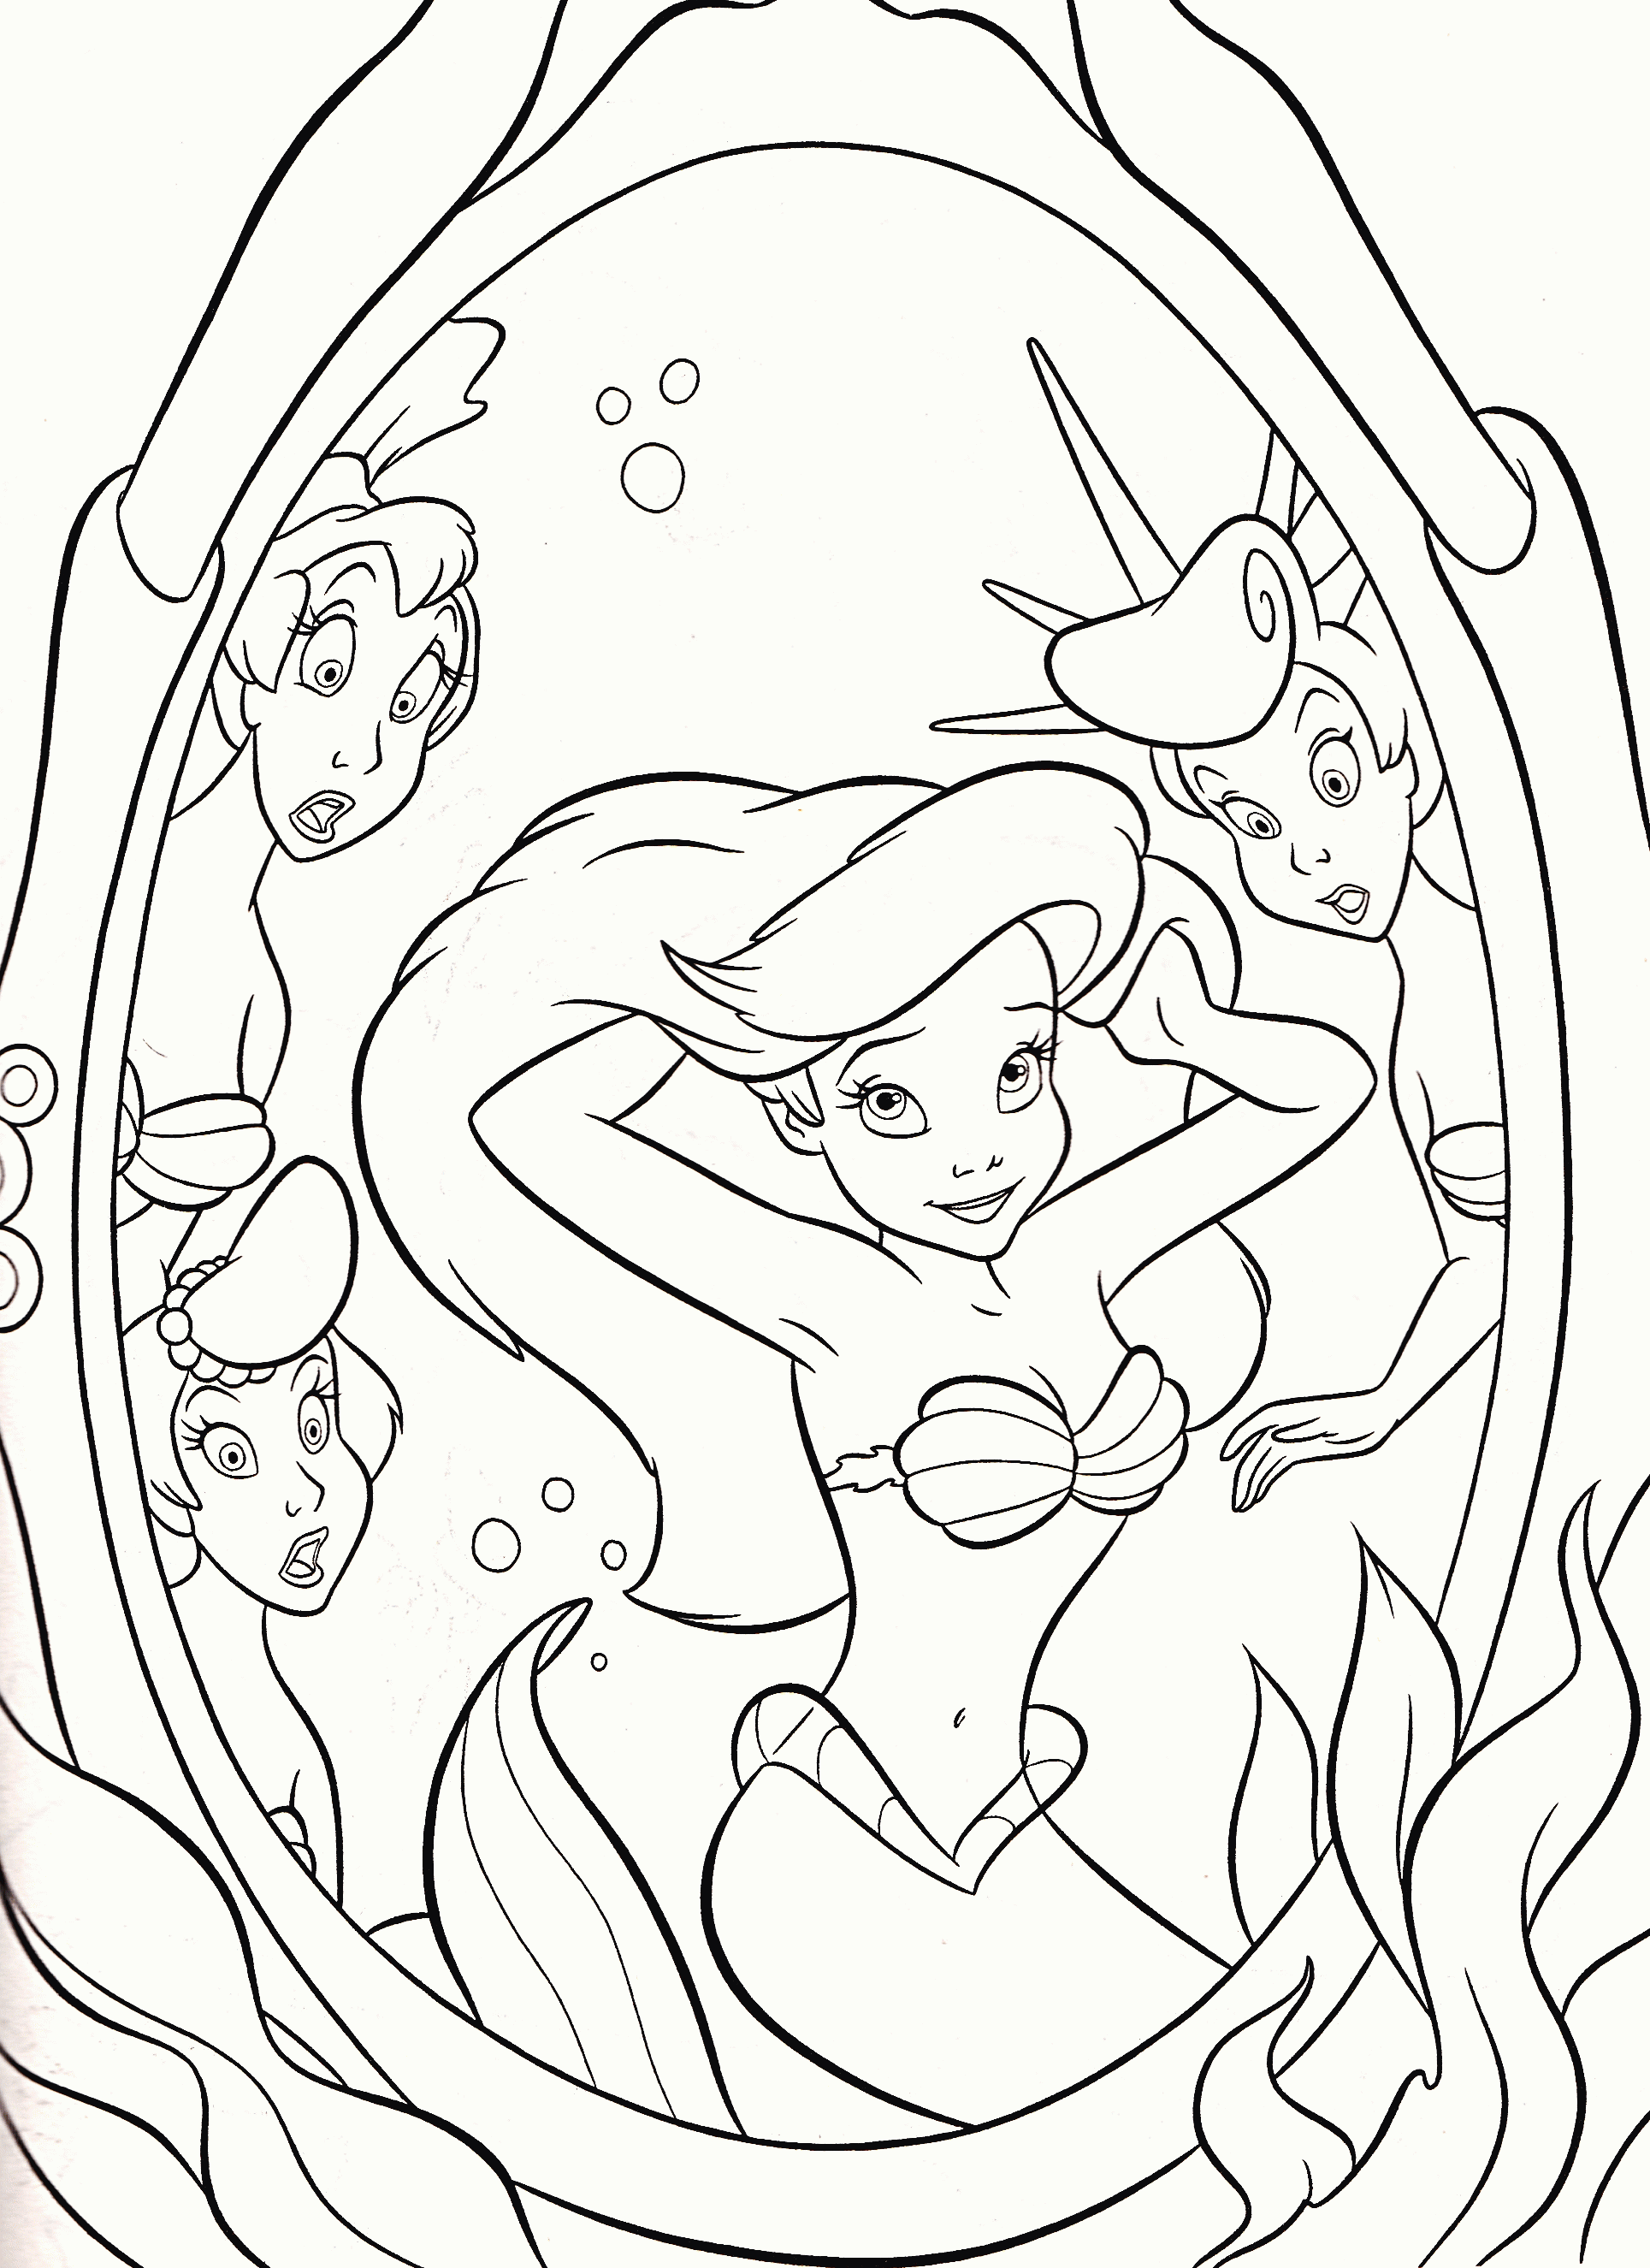 All Disney Princess Coloring Pages Zombie - Coloring Pages For All ...